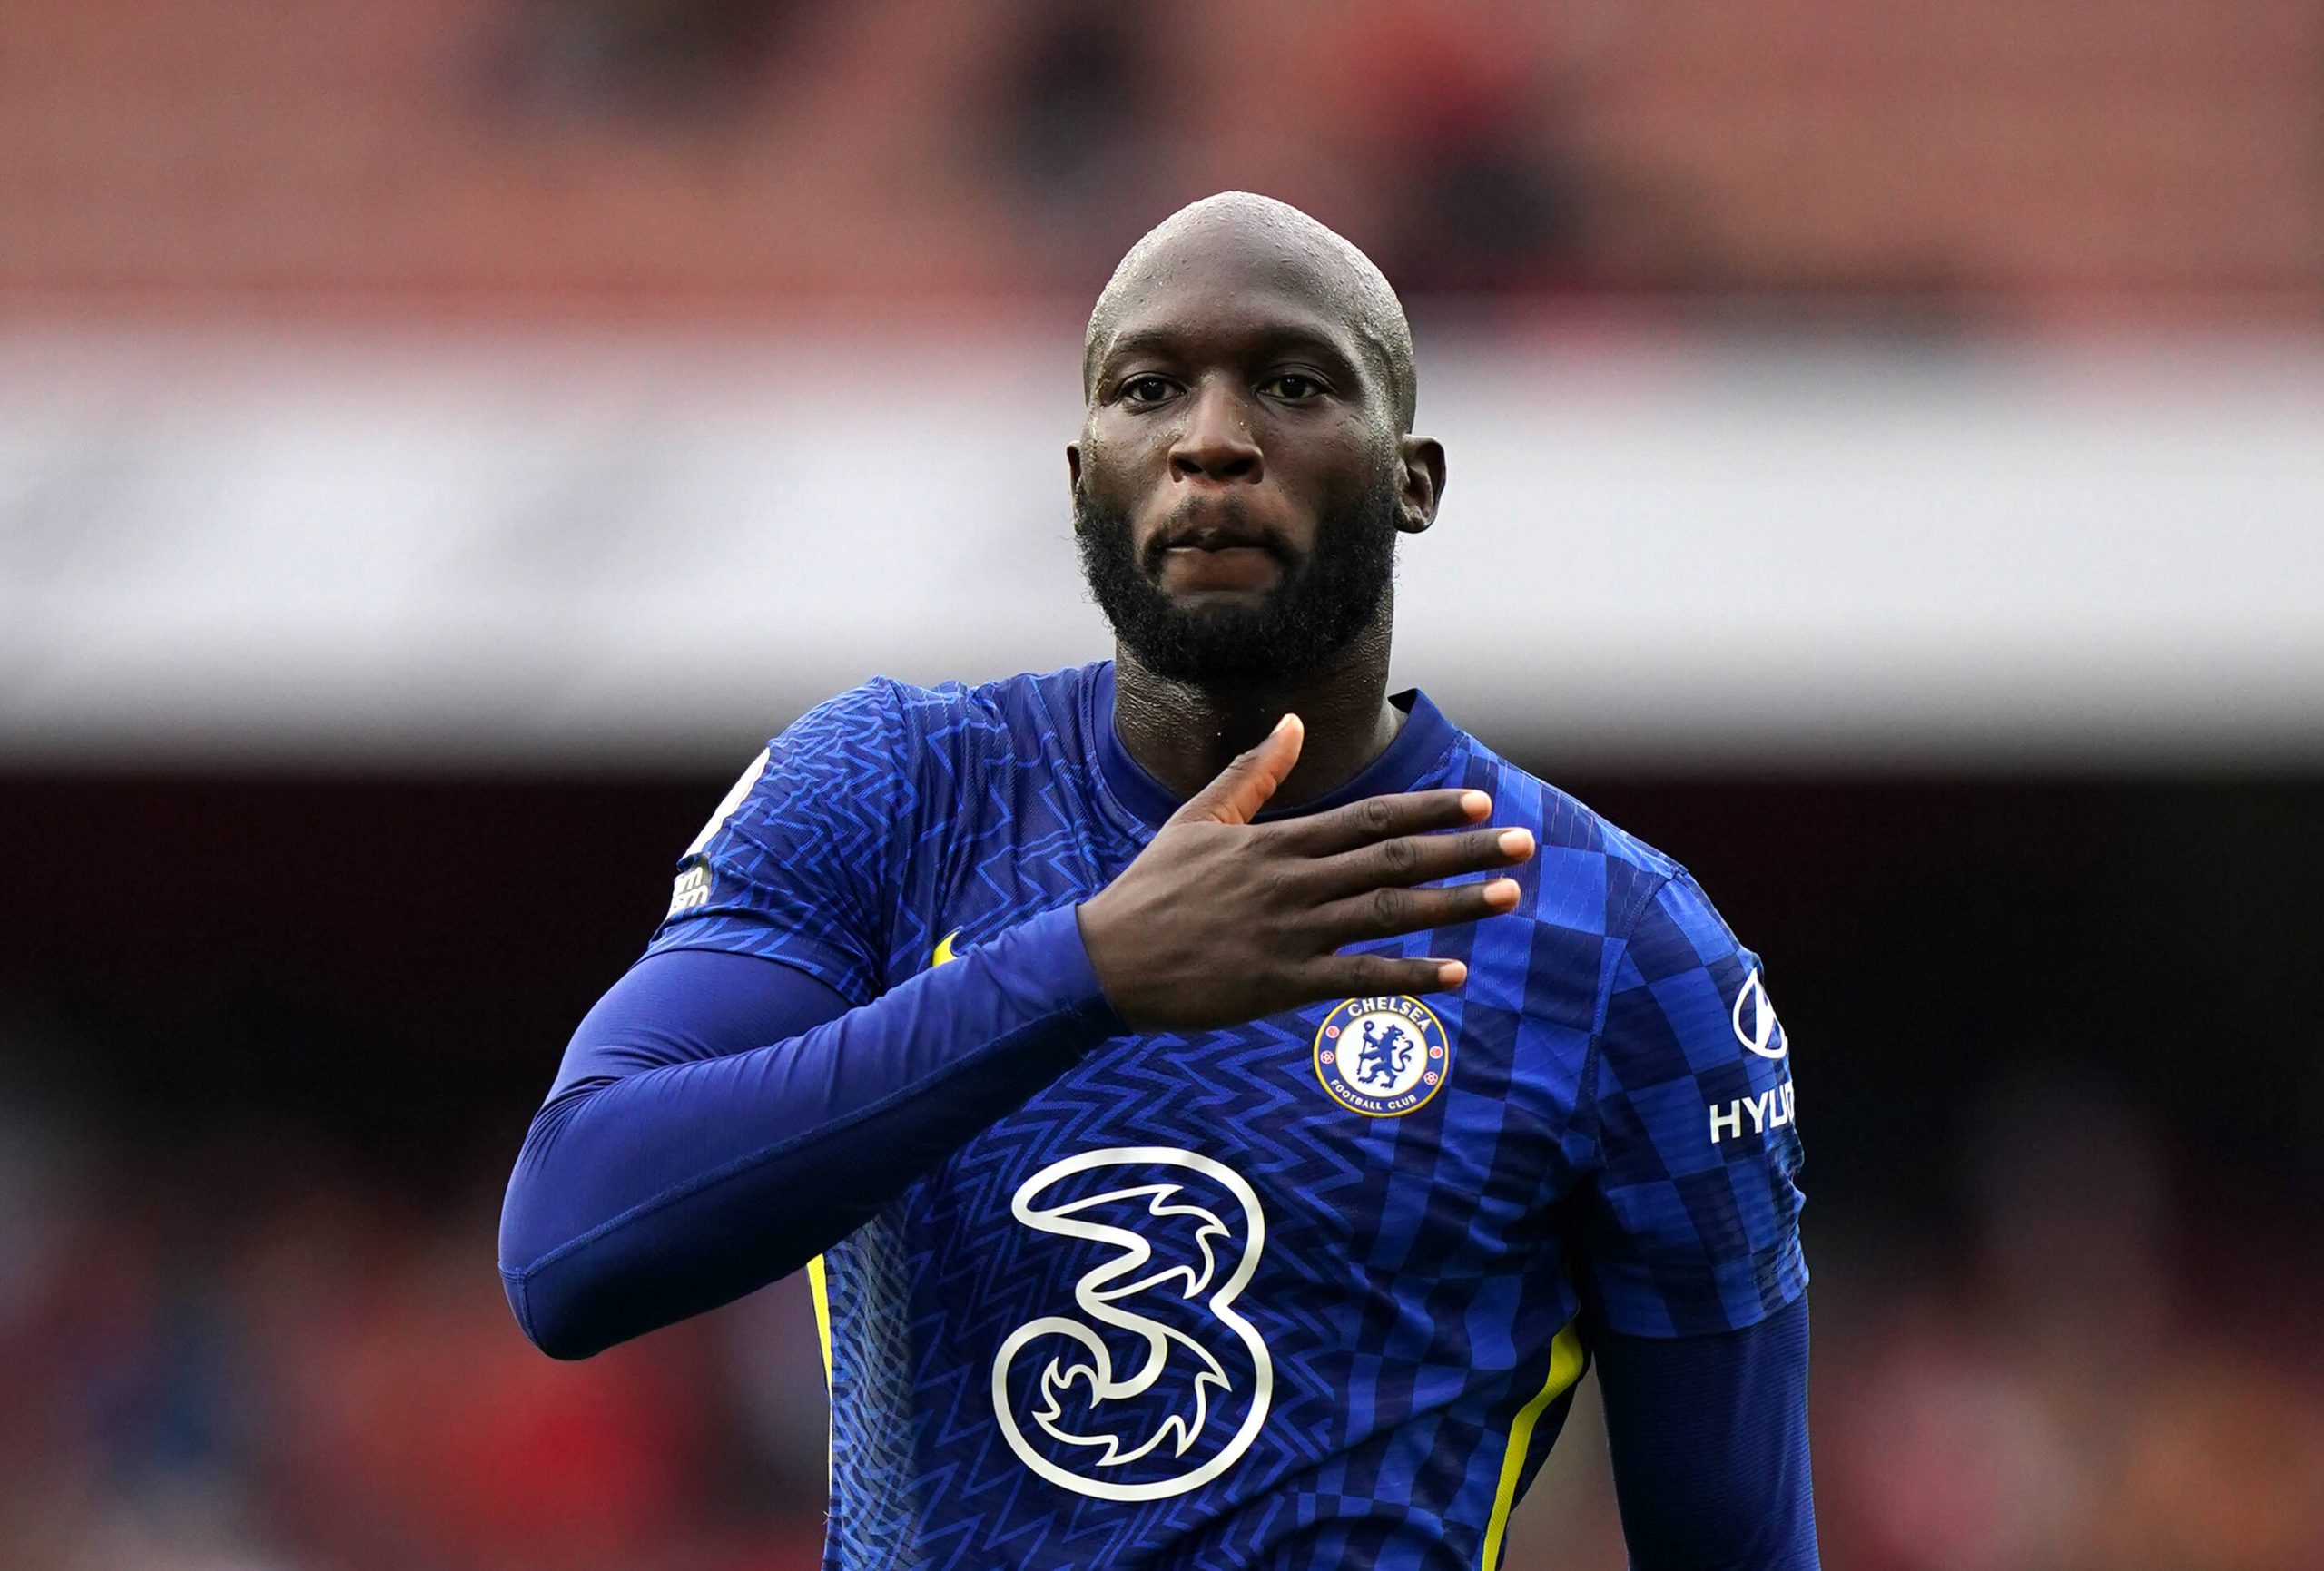 Chelsea tell Romelu Lukaku to lower his salary demands with AS Roma transfer on the cards.